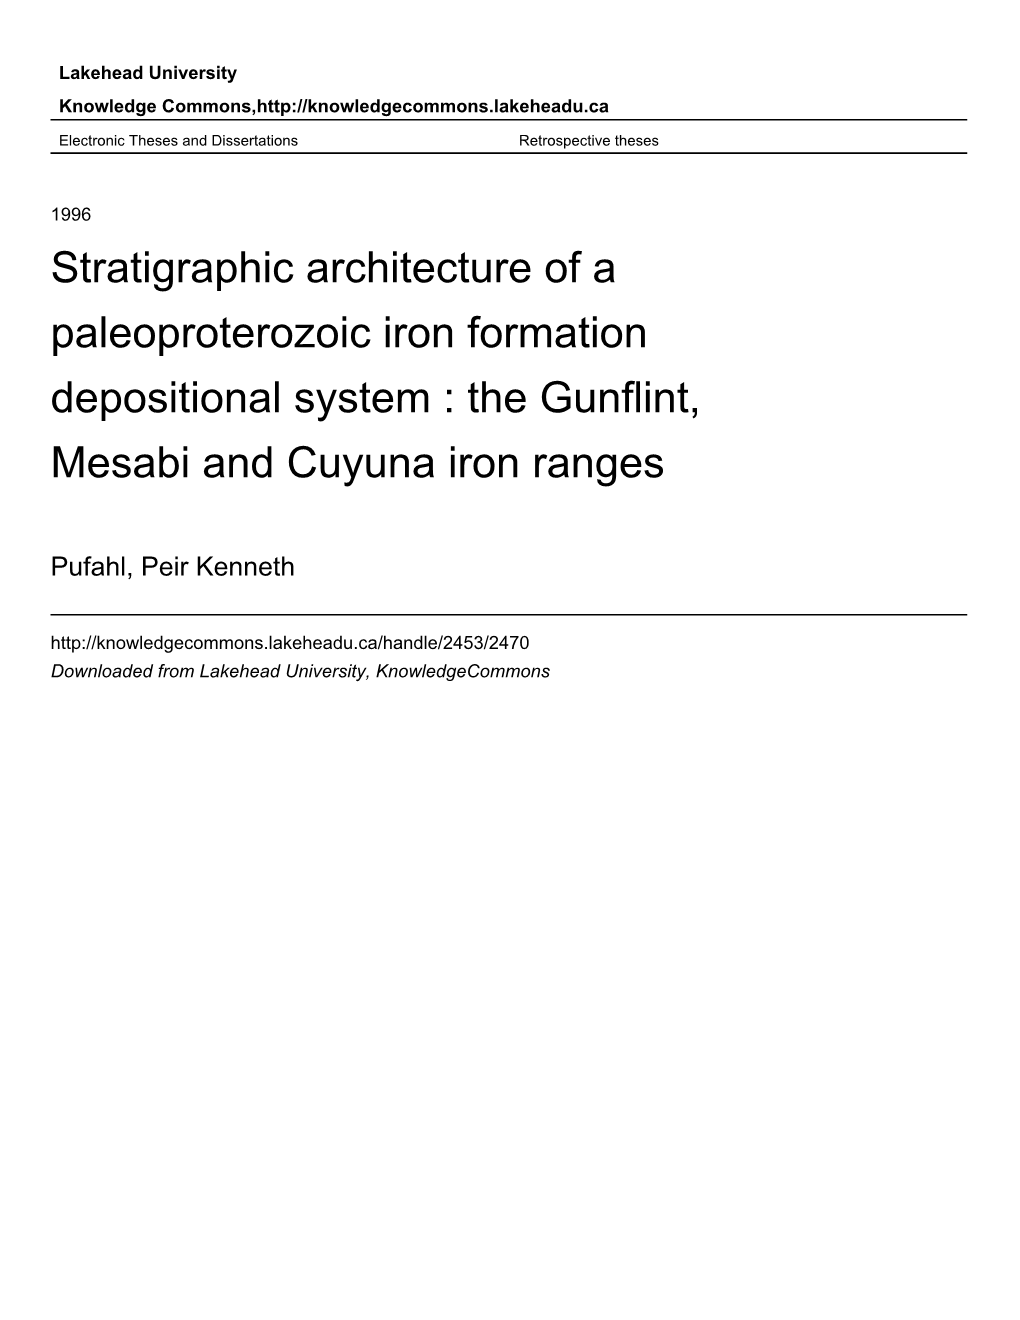 Stratigraphic Architecture of a Paleoproterozoic Iron Formation Depositional System : the Gunflint, Mesabi and Cuyuna Iron Ranges